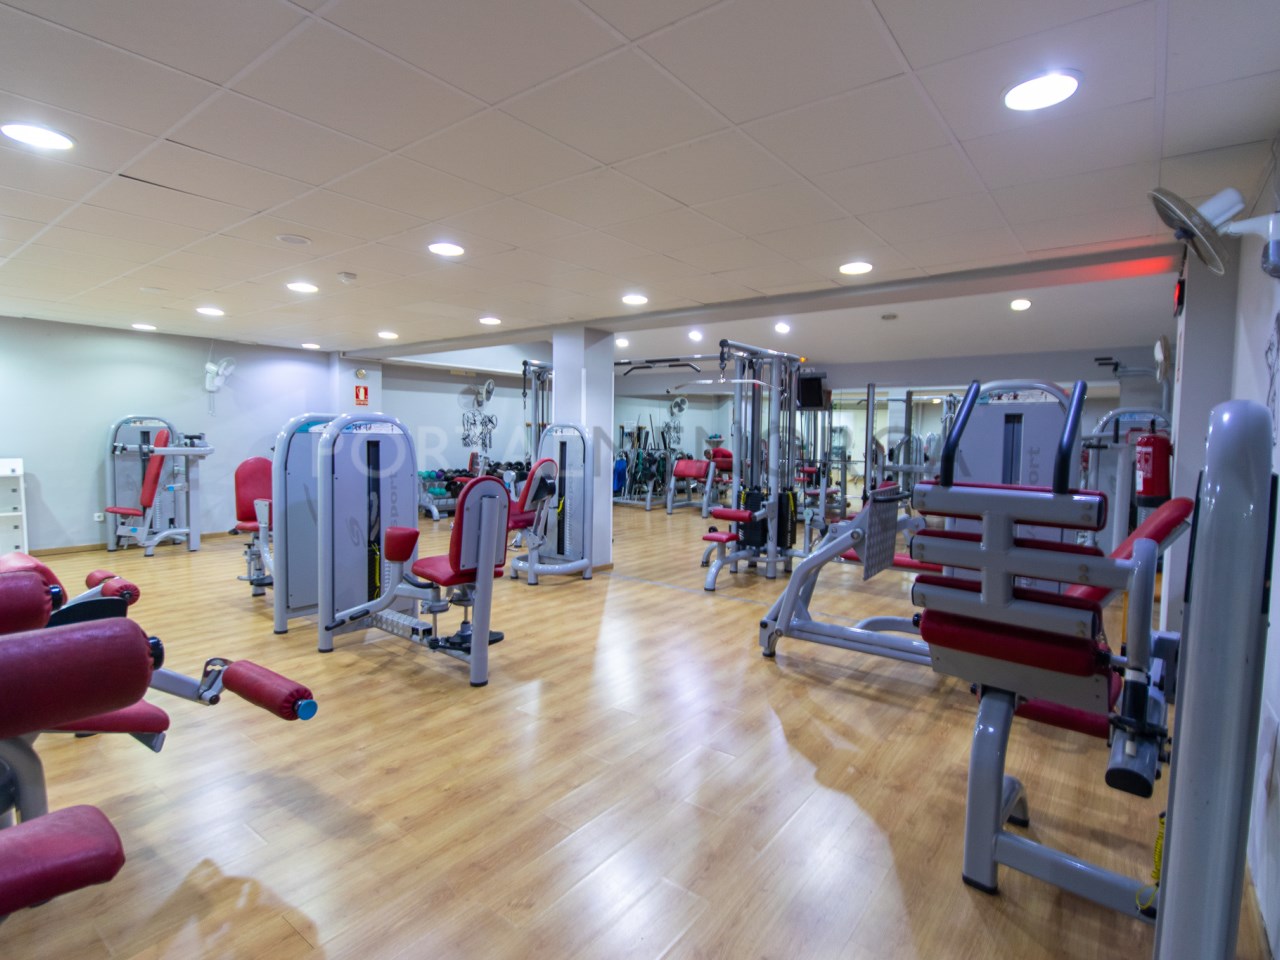 Gym area in building for sale in the village of Sant Lluis